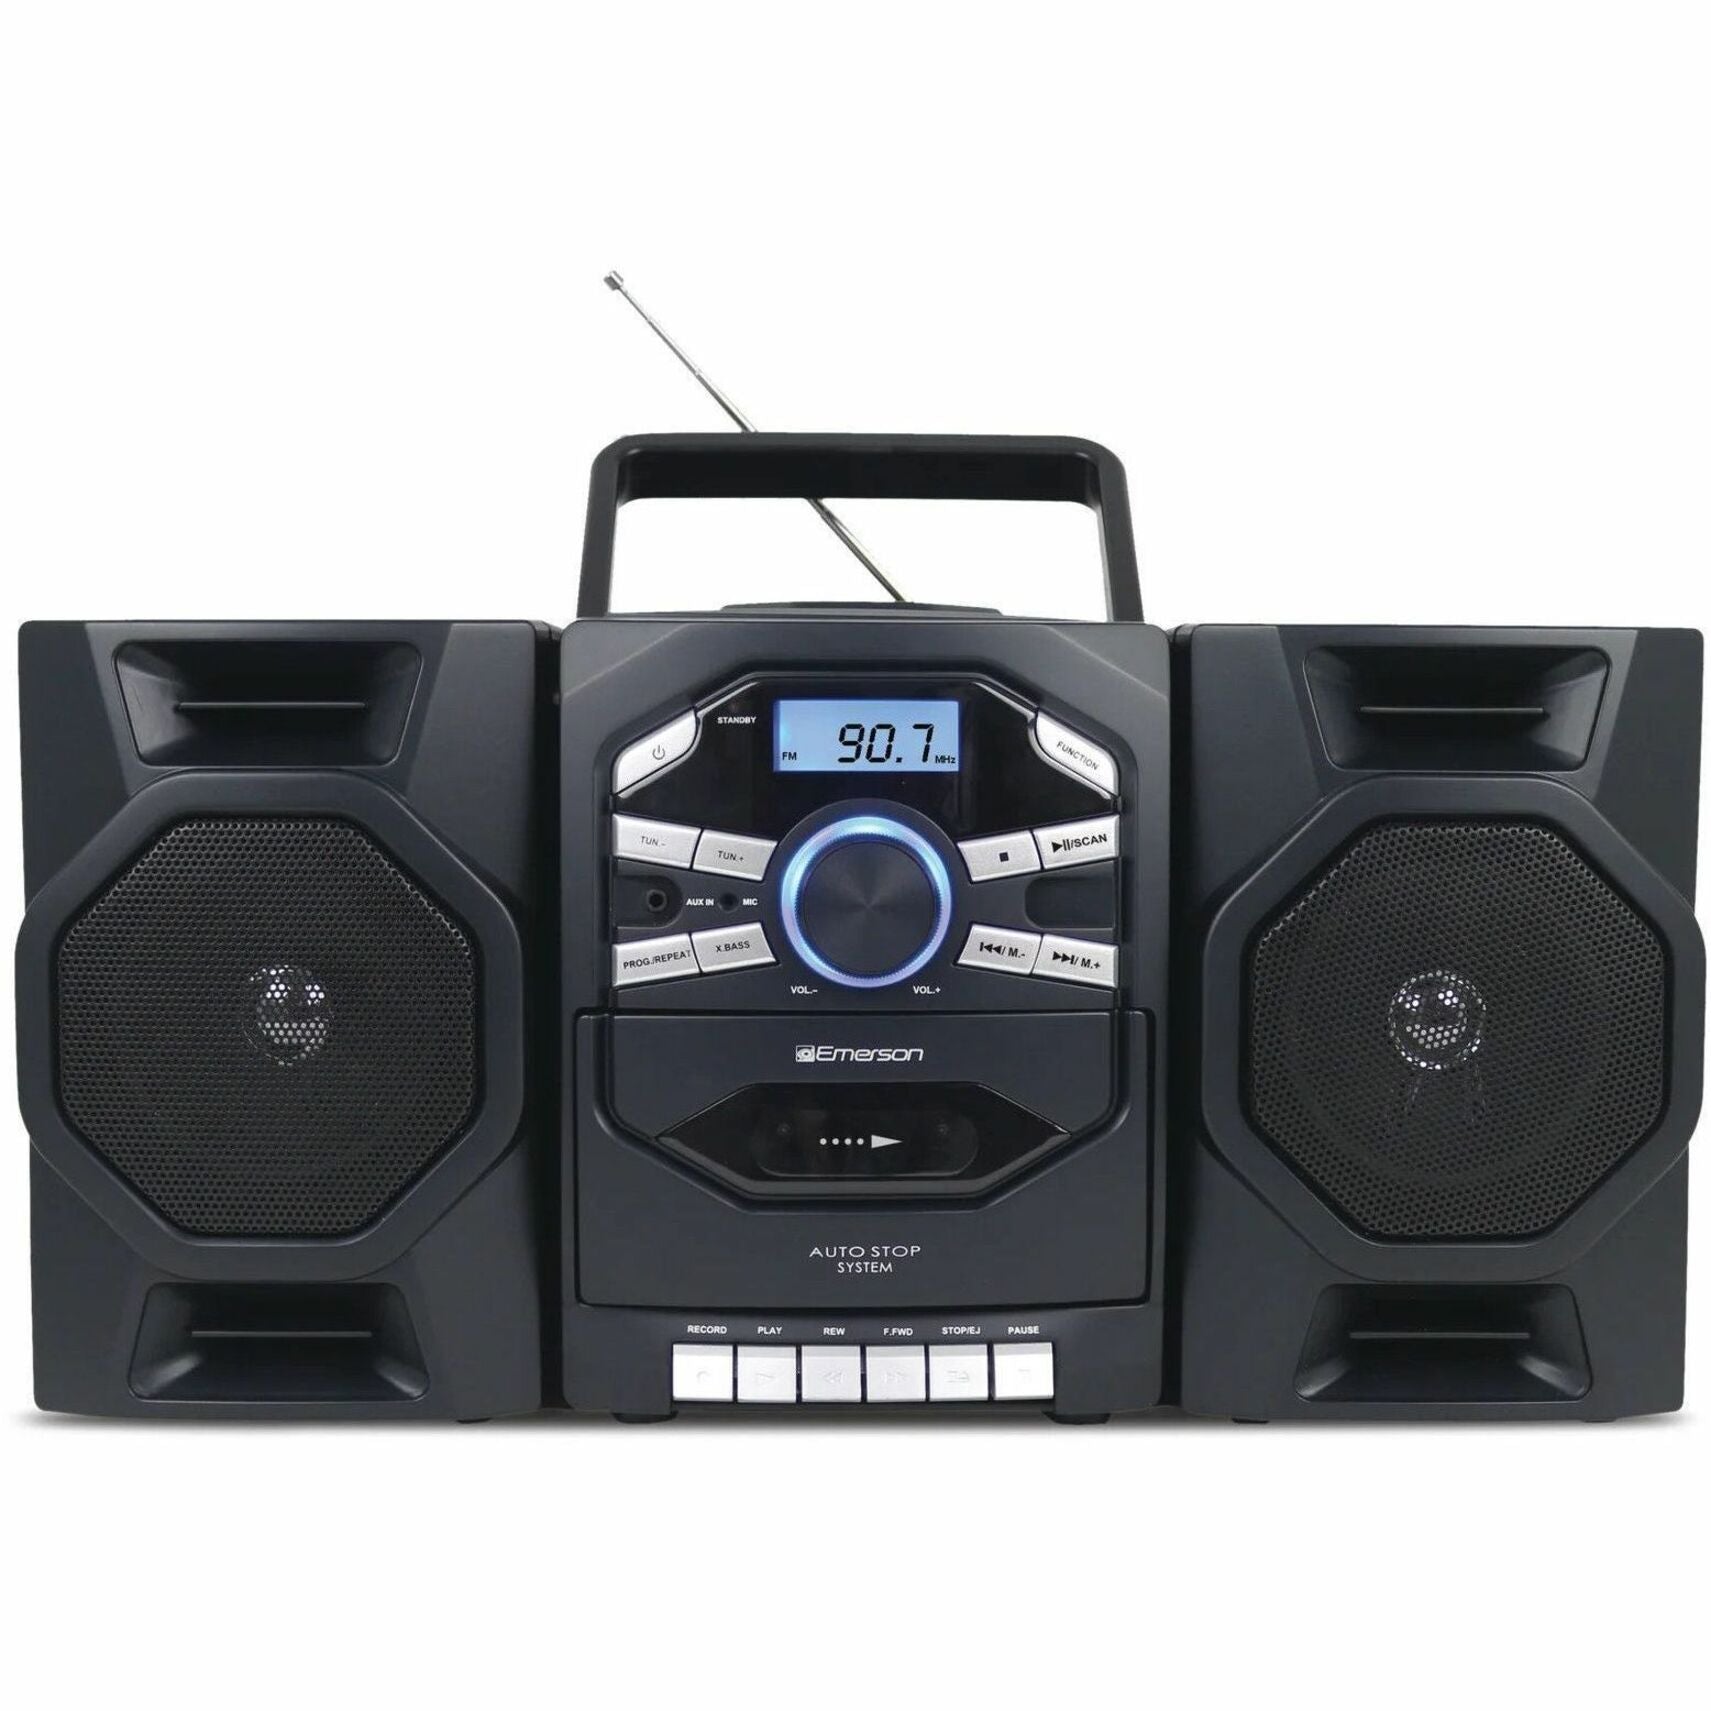 Emerson EPB-4000 Portable CD & Cassette Stereo Boombox With AM/FM Radio, Bluetooth, Carrying Handle